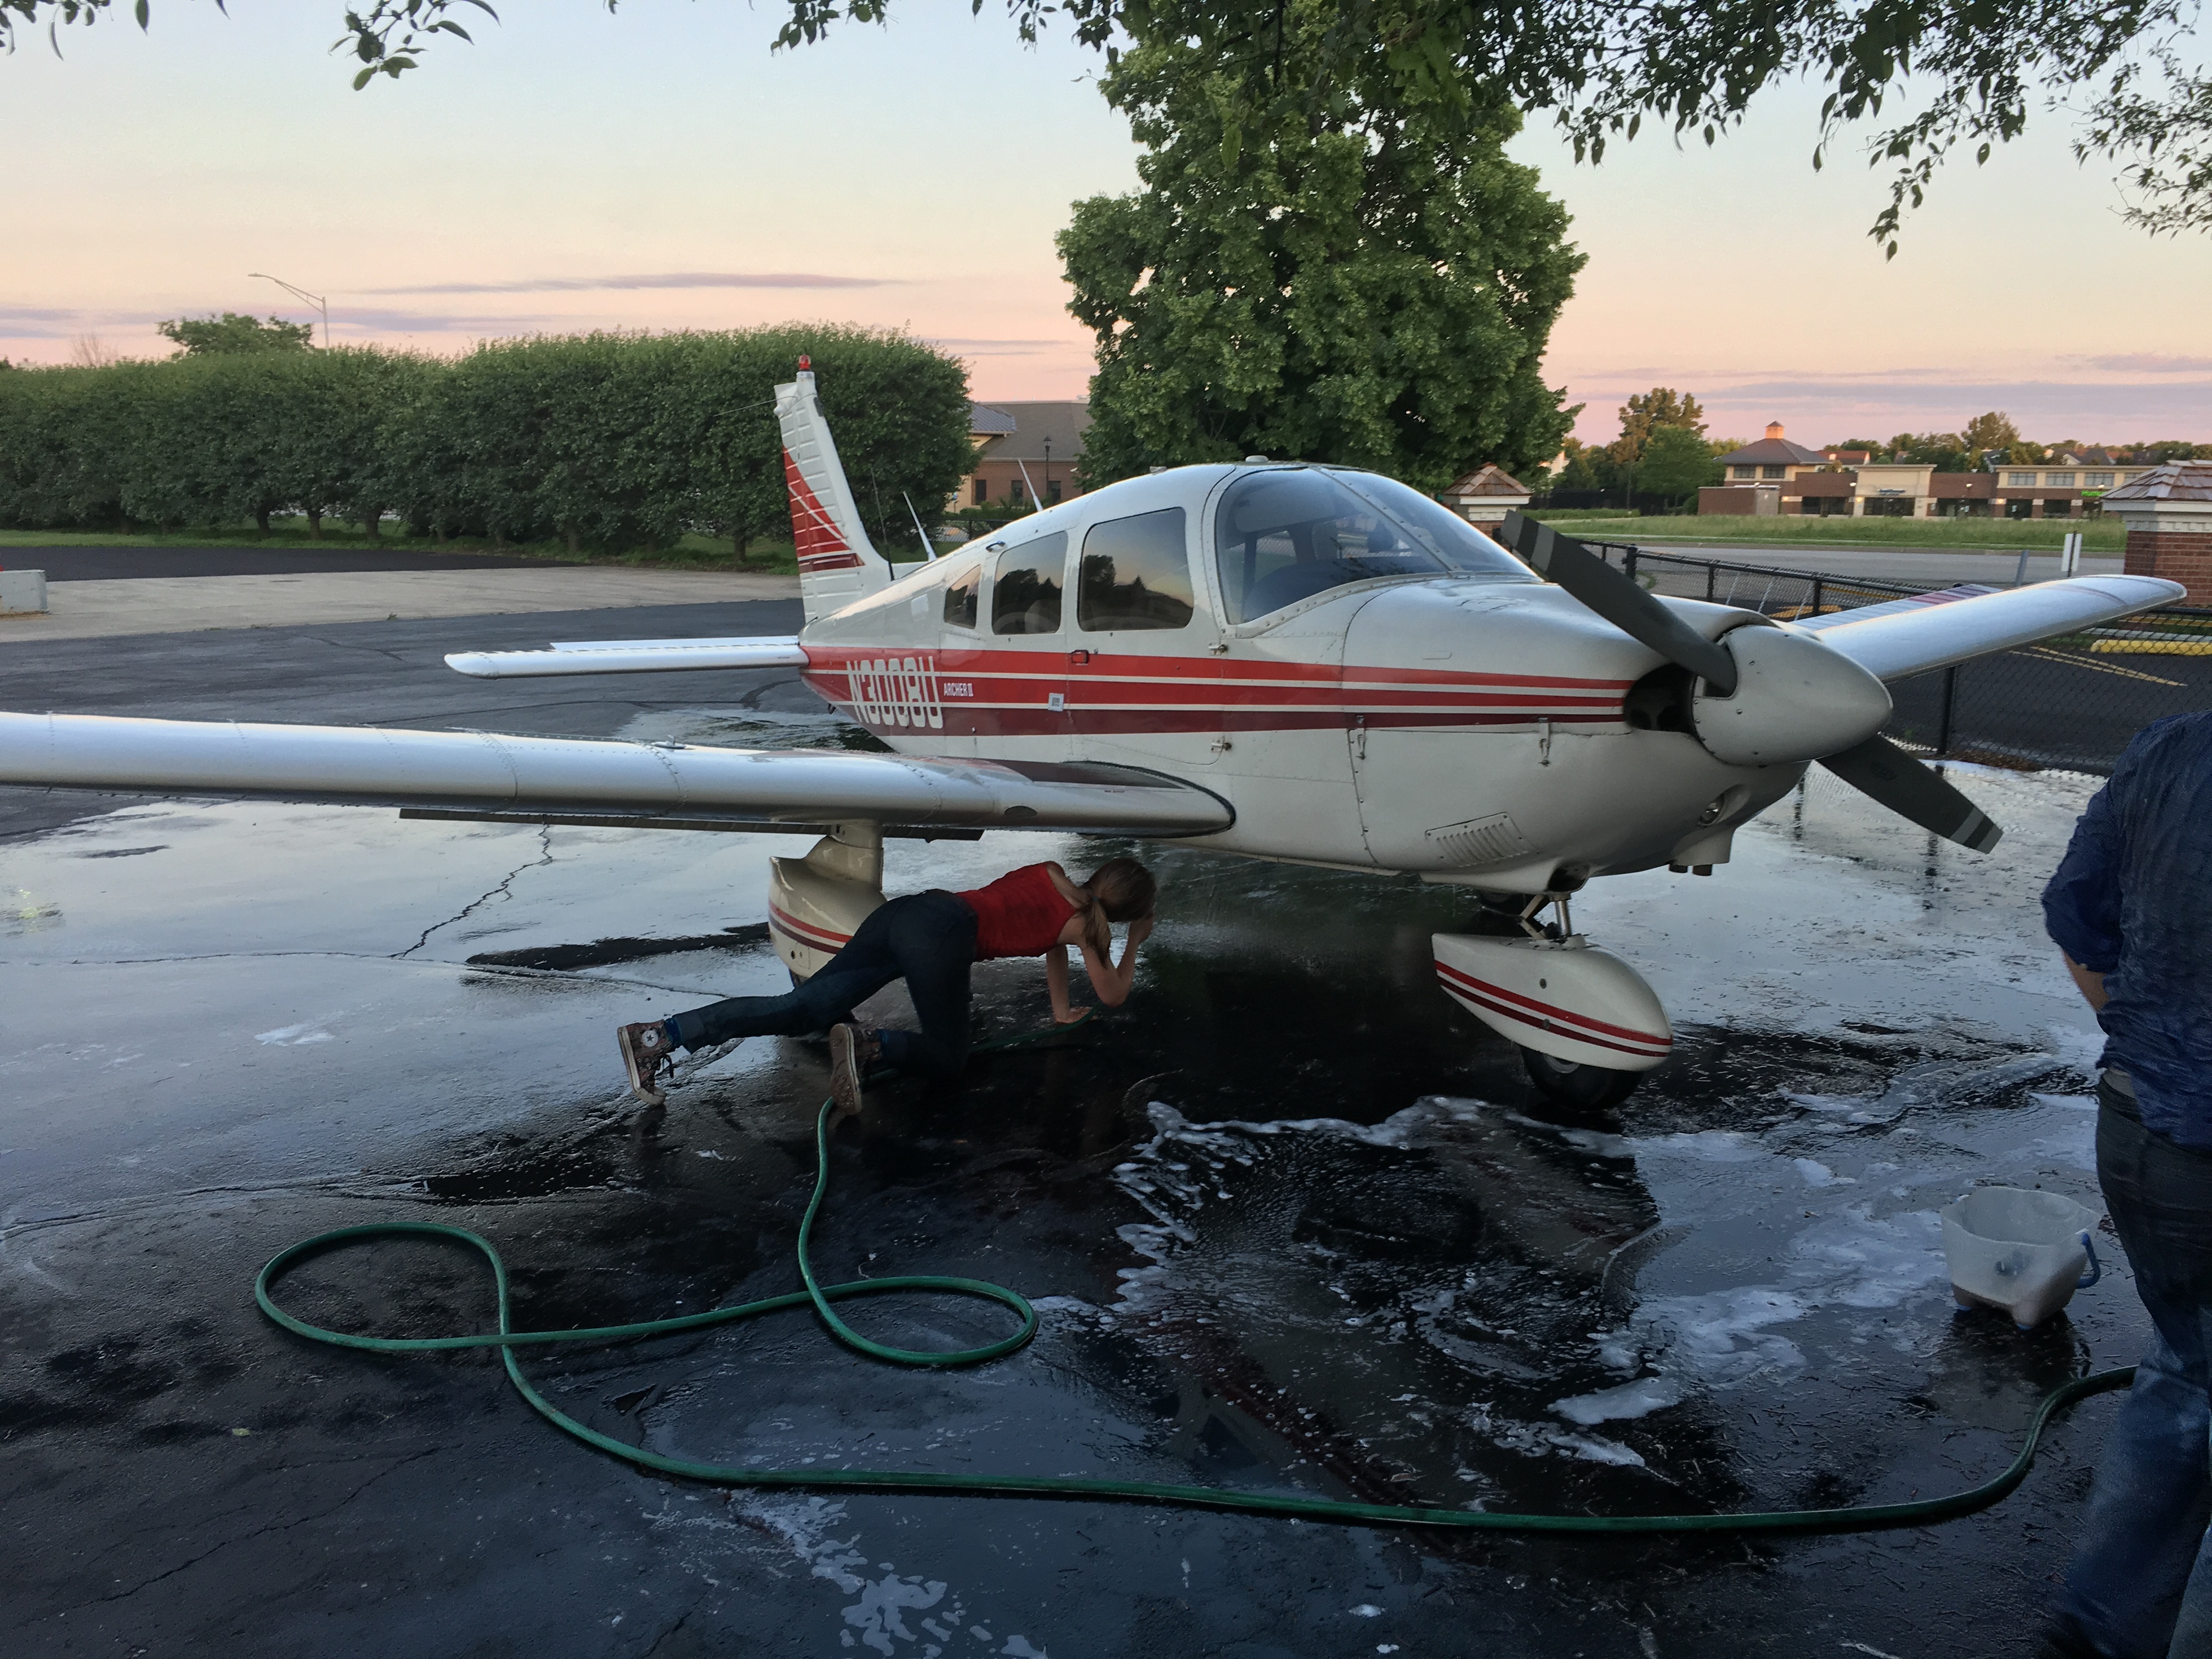 Washing our planes